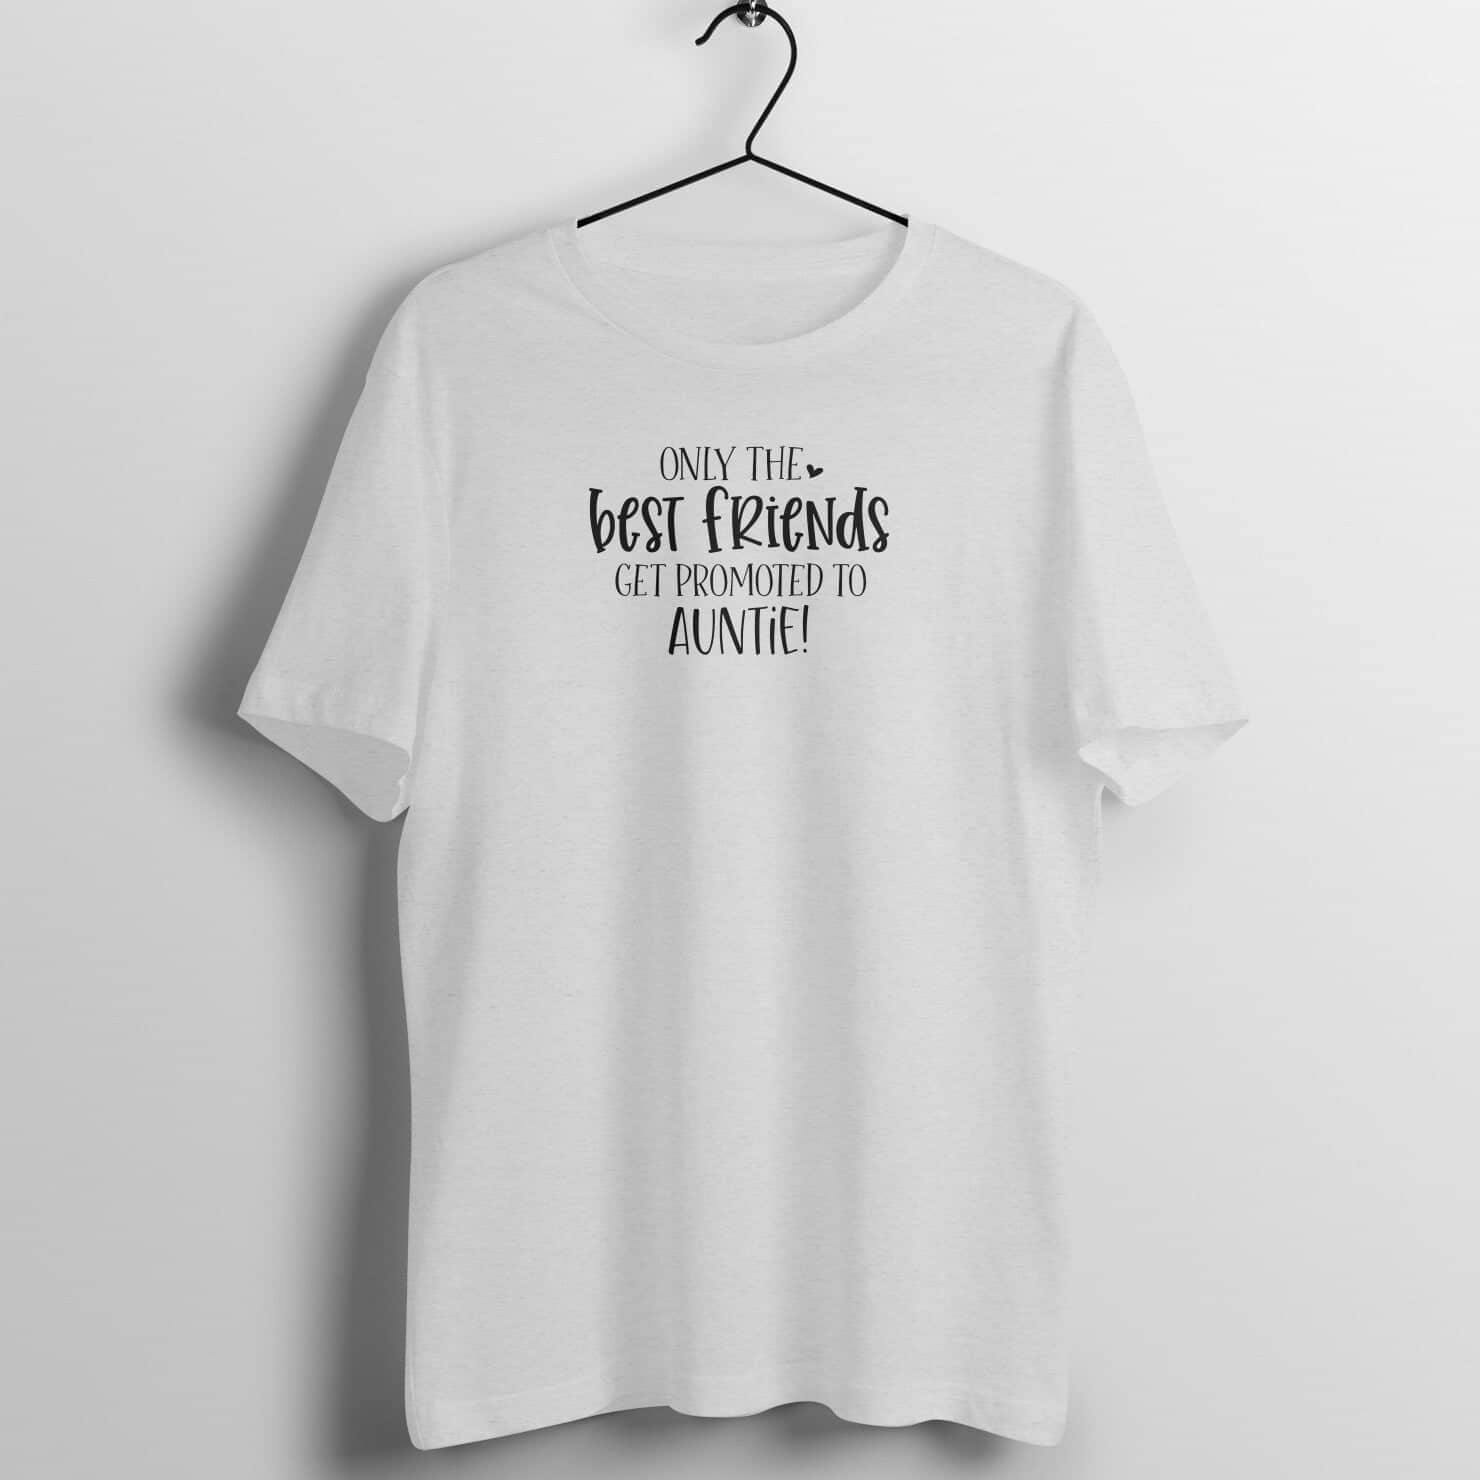 Only the Best Friends Get Promoted to Auntie Special Melange Grey T Shirt for Women Printrove Melange Grey S 